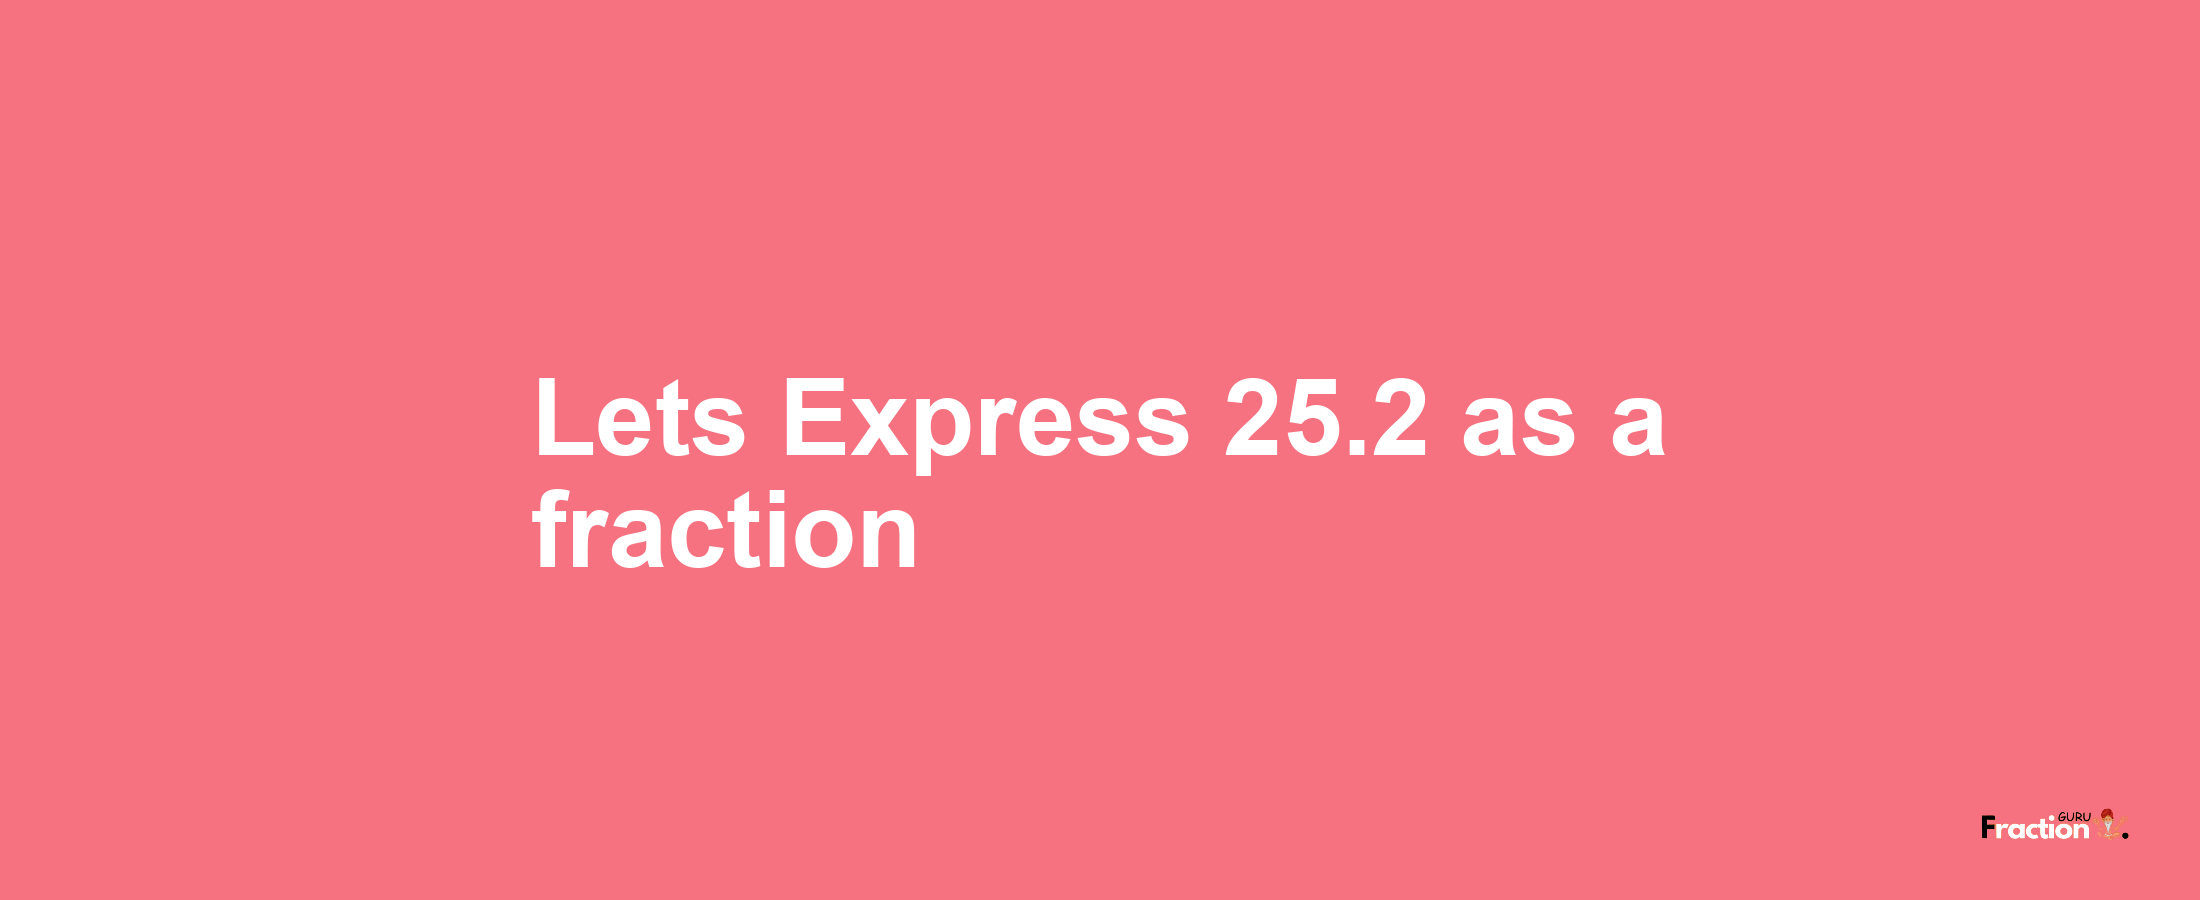 Lets Express 25.2 as afraction